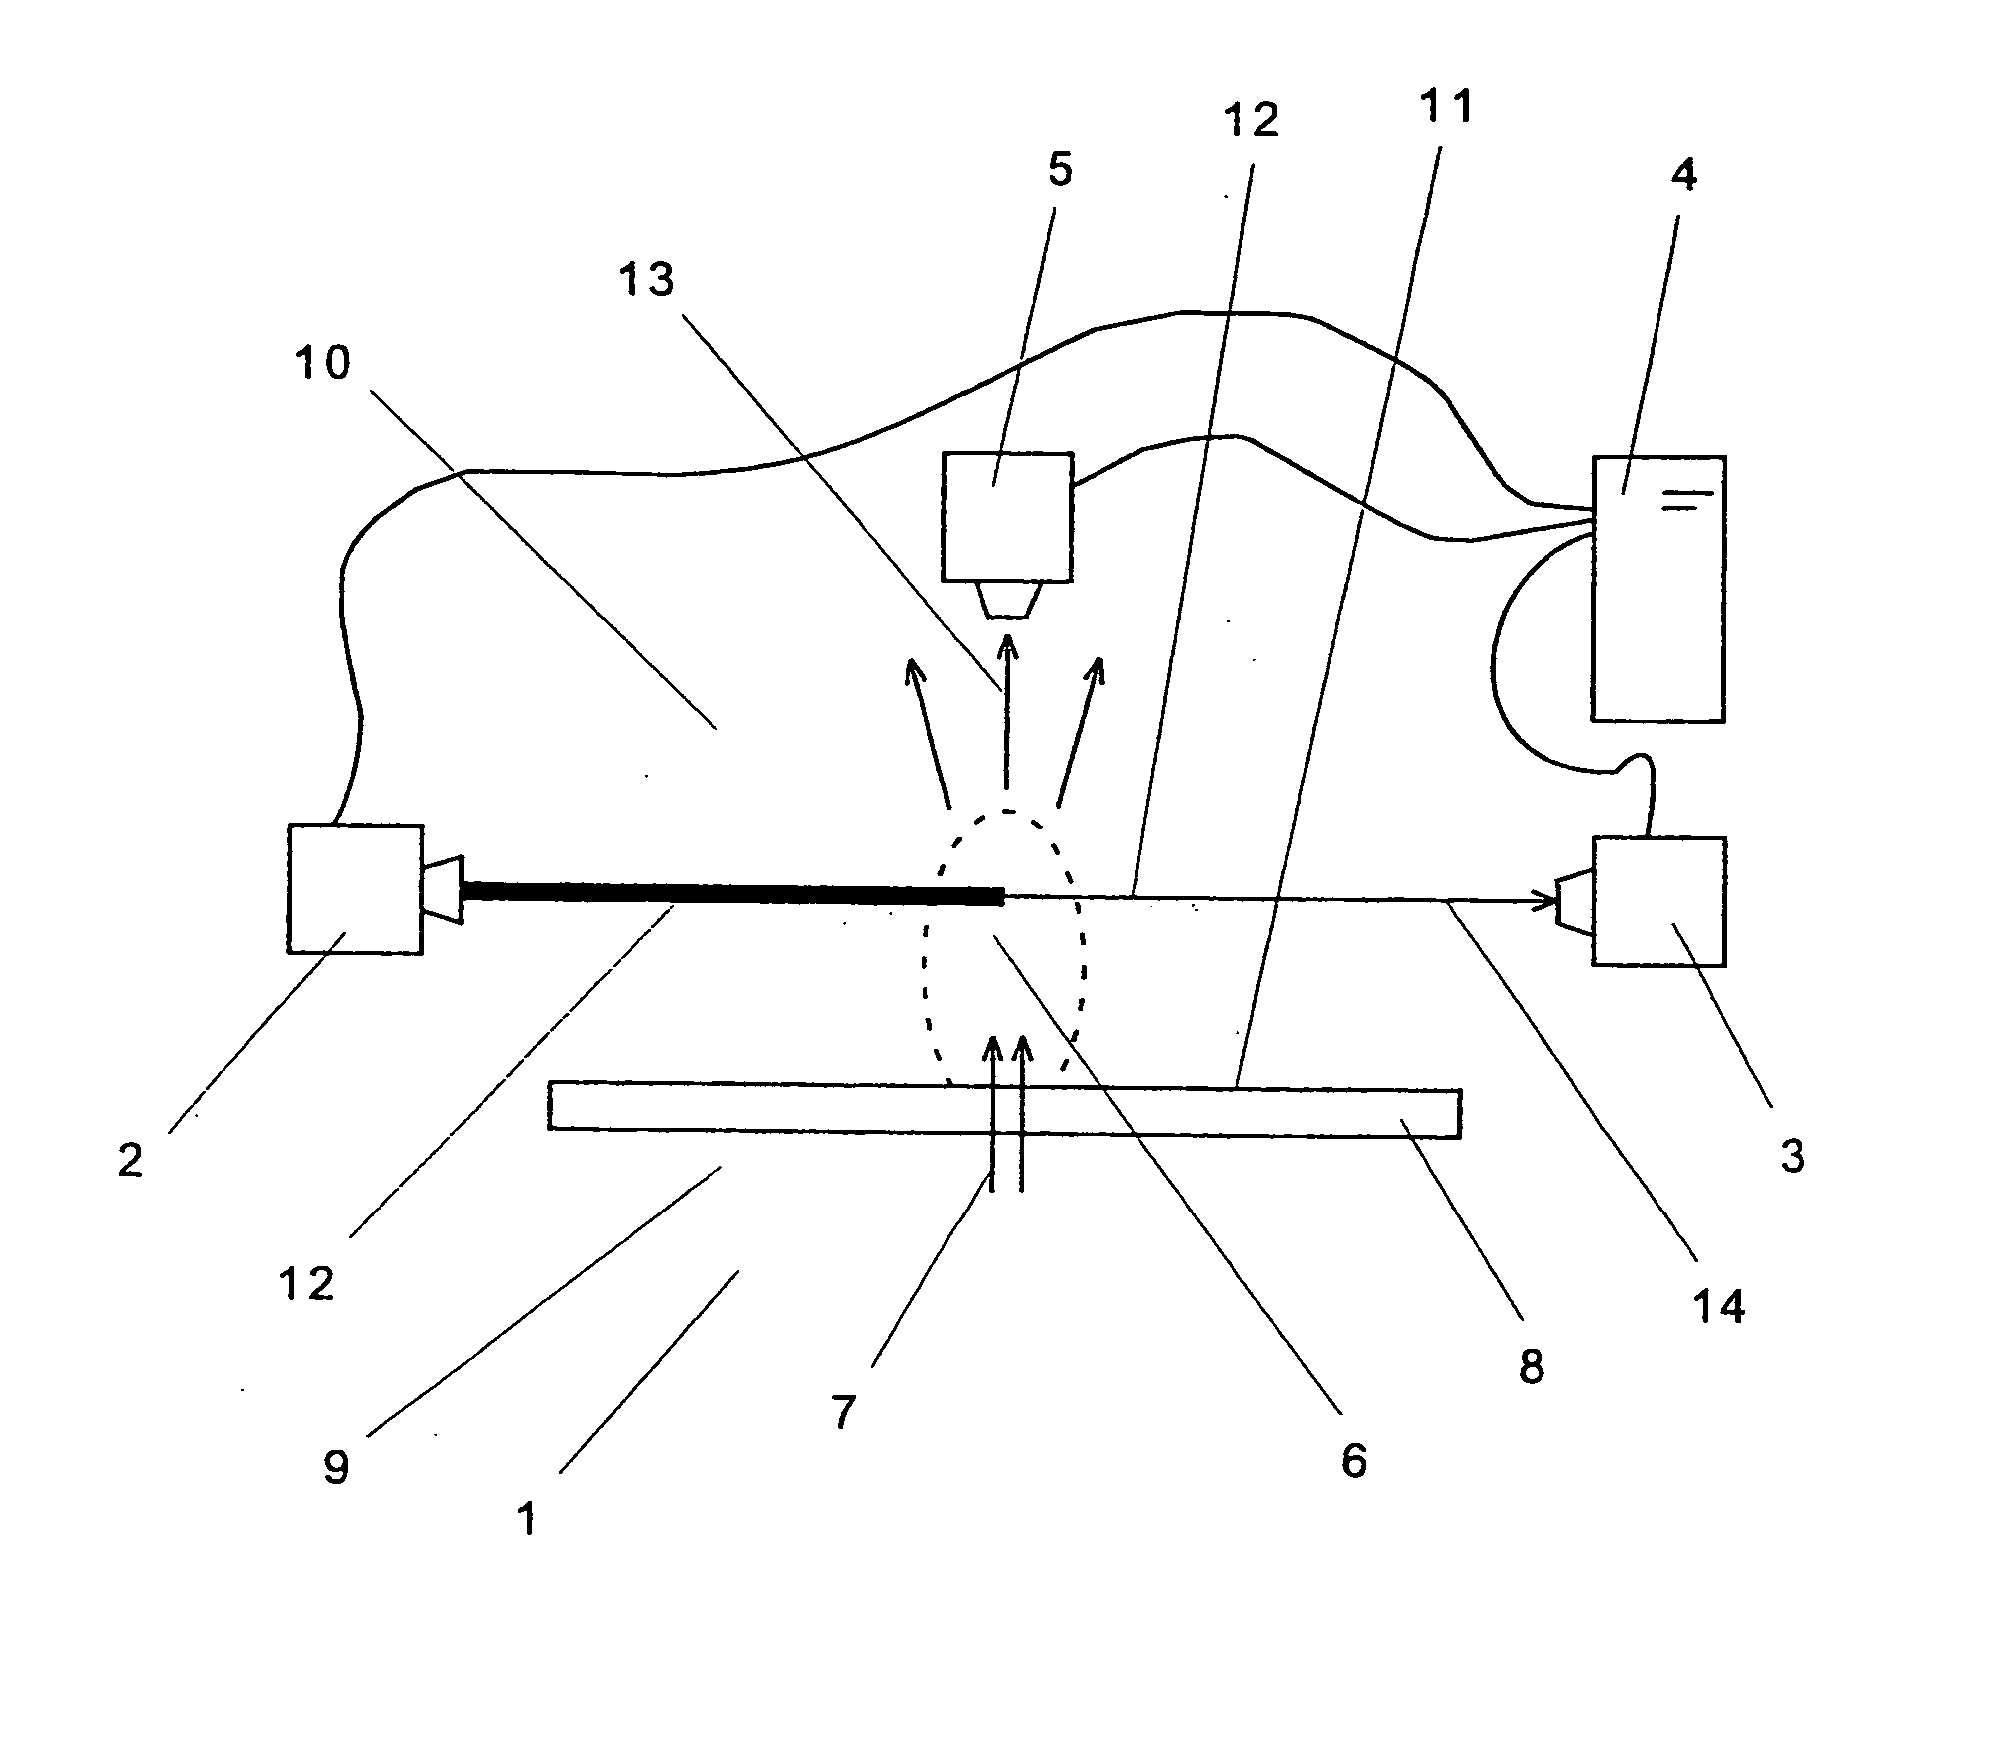 Test apparatus and method for examining sheet-like components for perforations